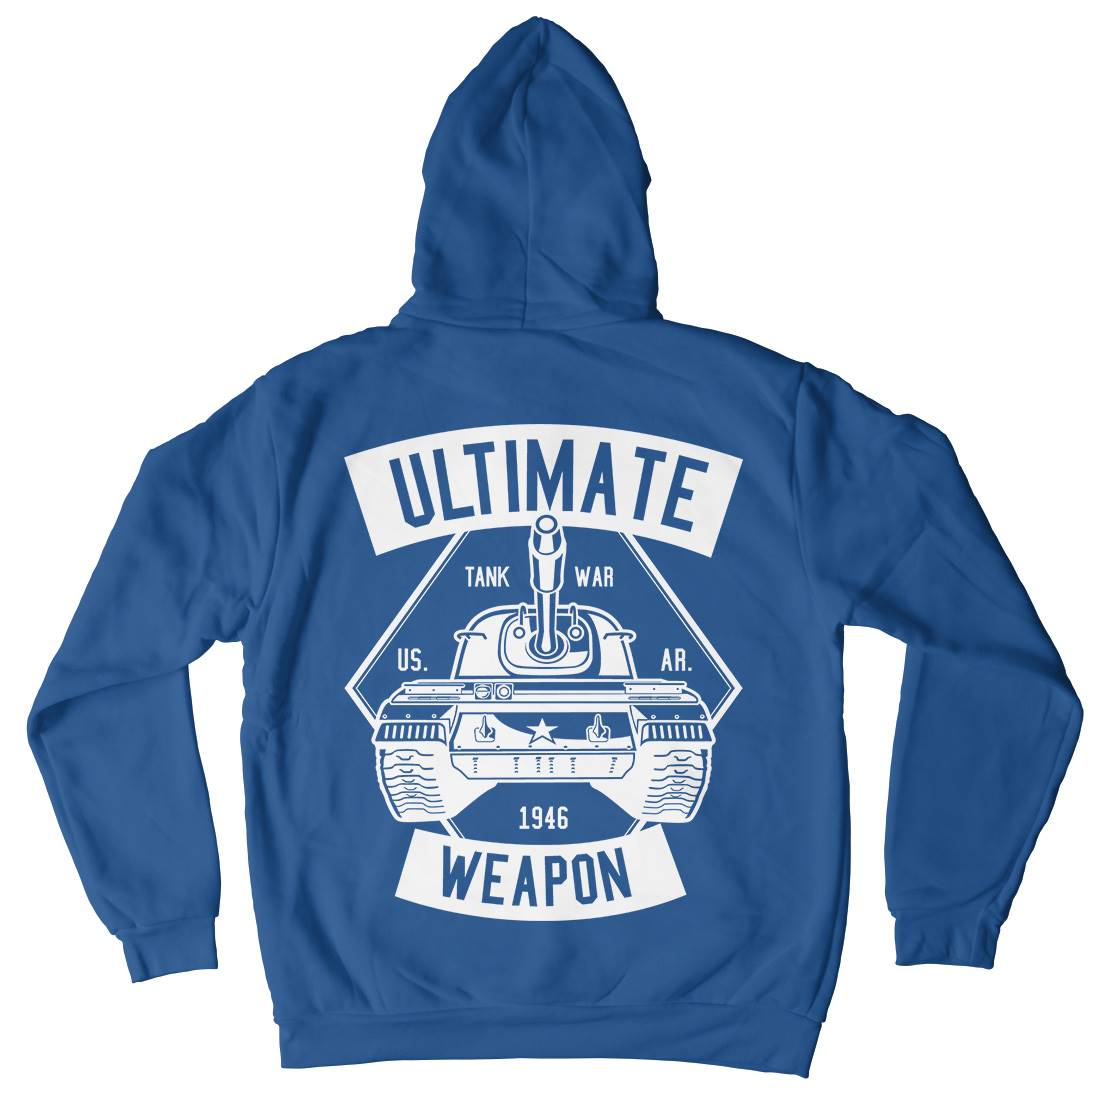 Tank War Ultimate Weapon Mens Hoodie With Pocket Army B649